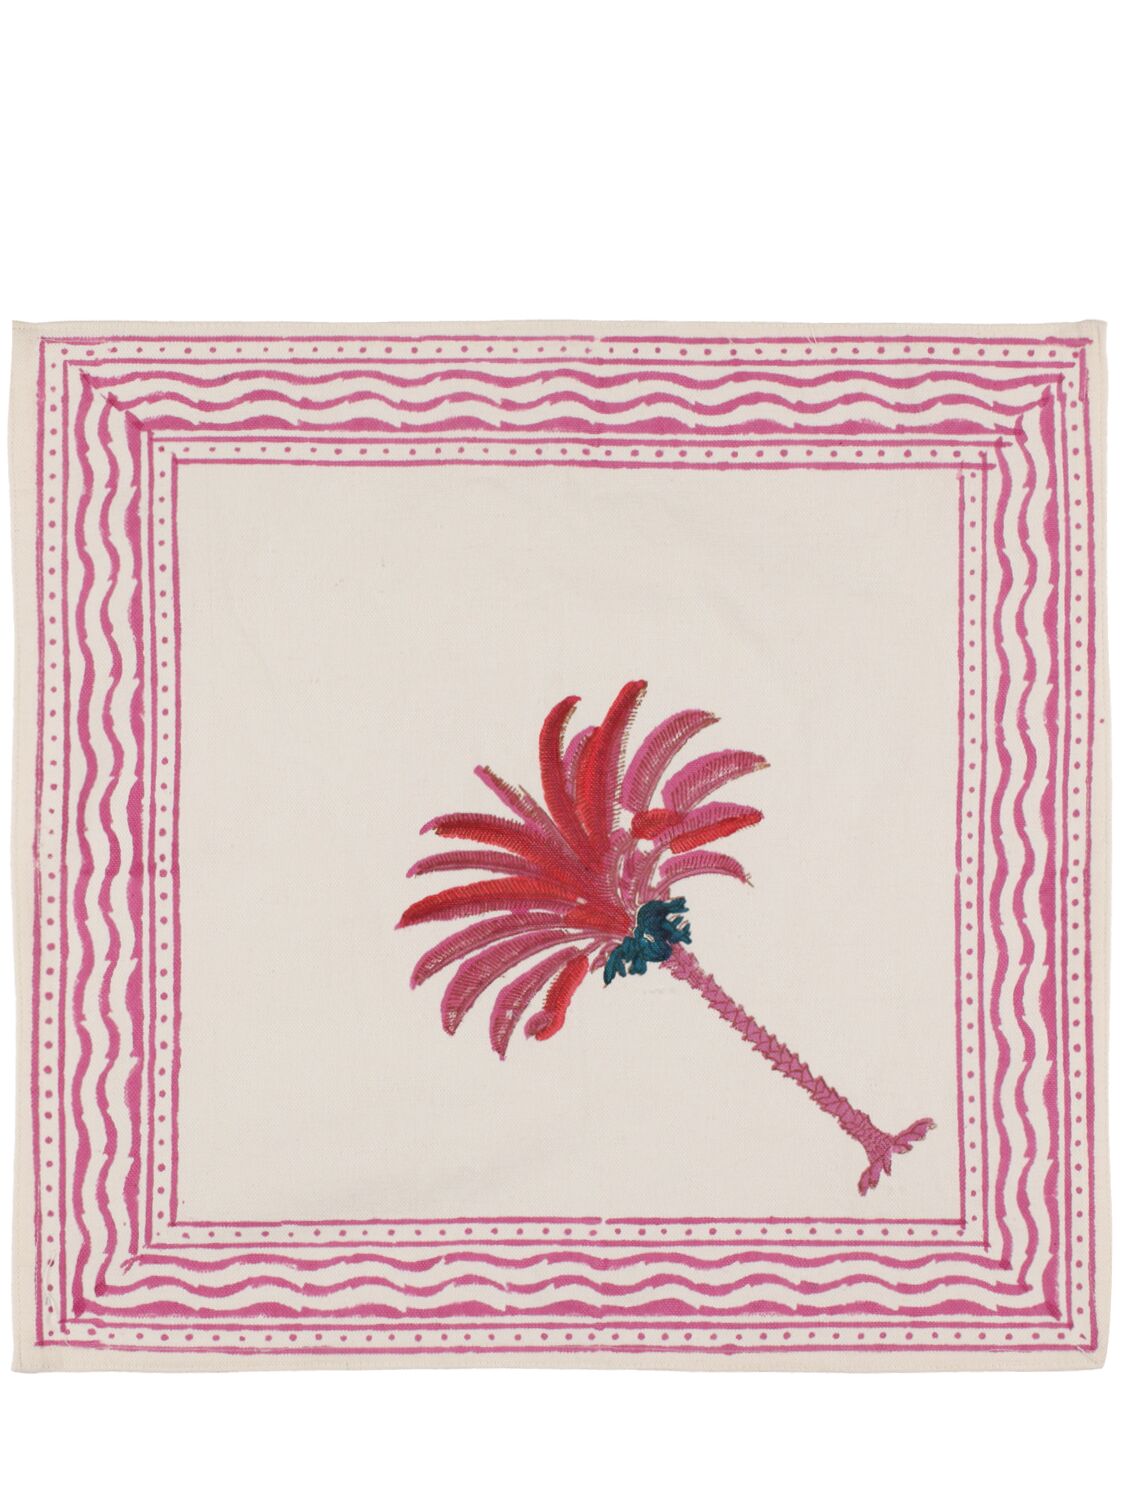 Les Ottomans Set Of 4 Handprinted Cotton Napkins In Pink